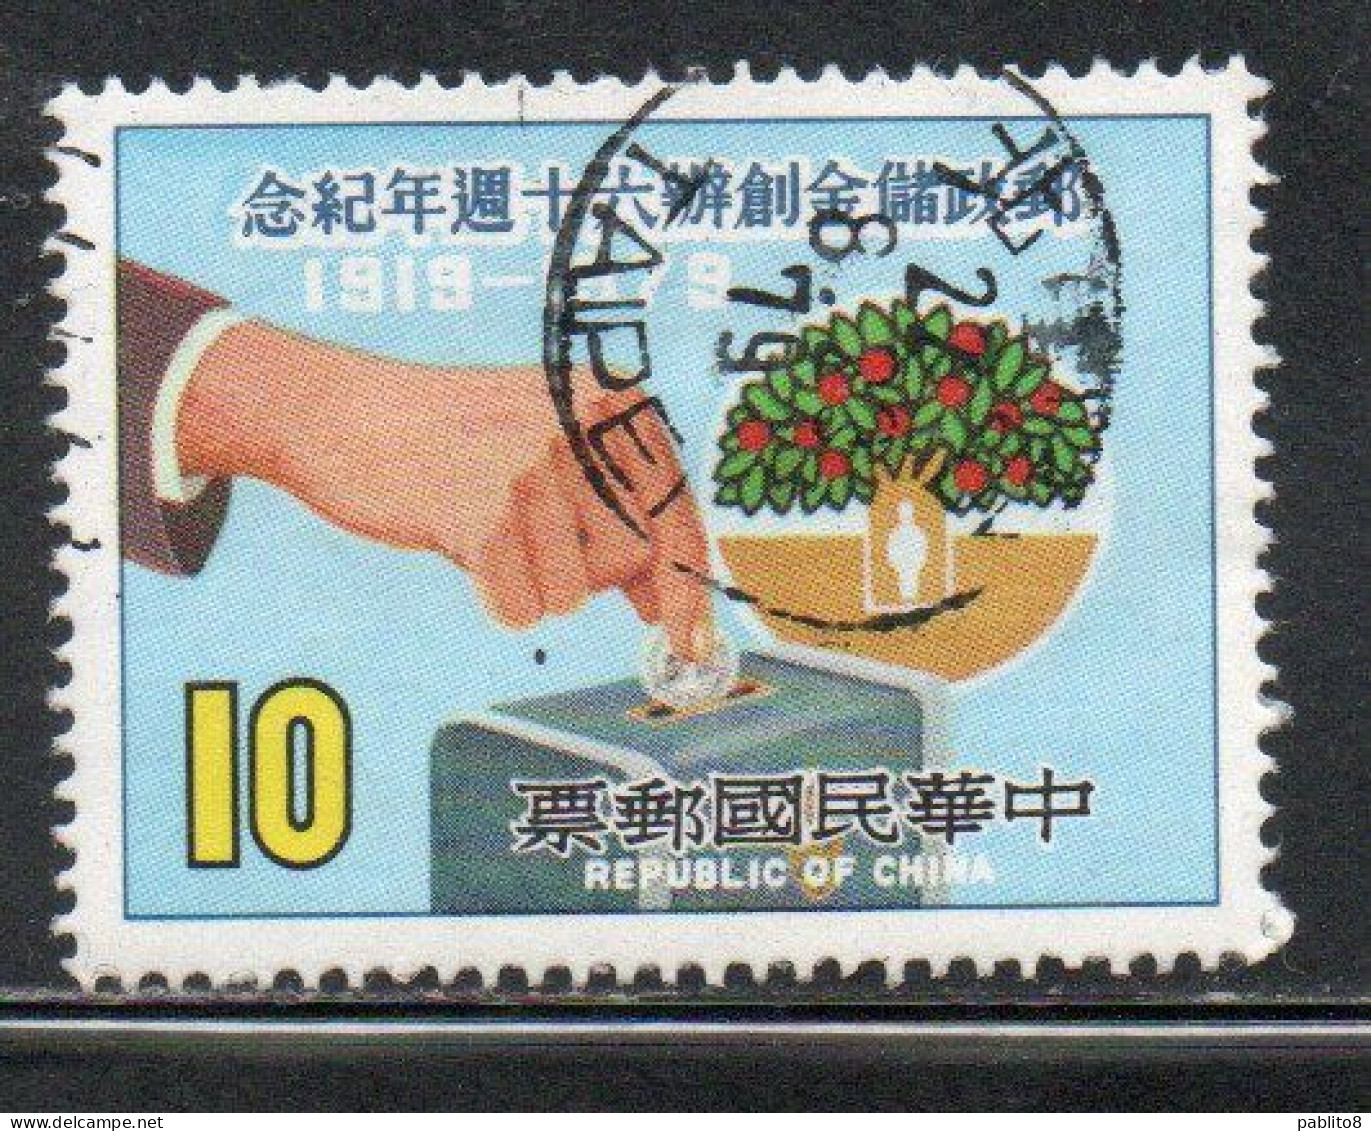 CHINA REPUBLIC CINA TAIWAN FORMOSA 1979 POSTAL SAVINGS HAND PUTTING COIN IN BANK 10$ USED USATO OBLITERE' - Used Stamps